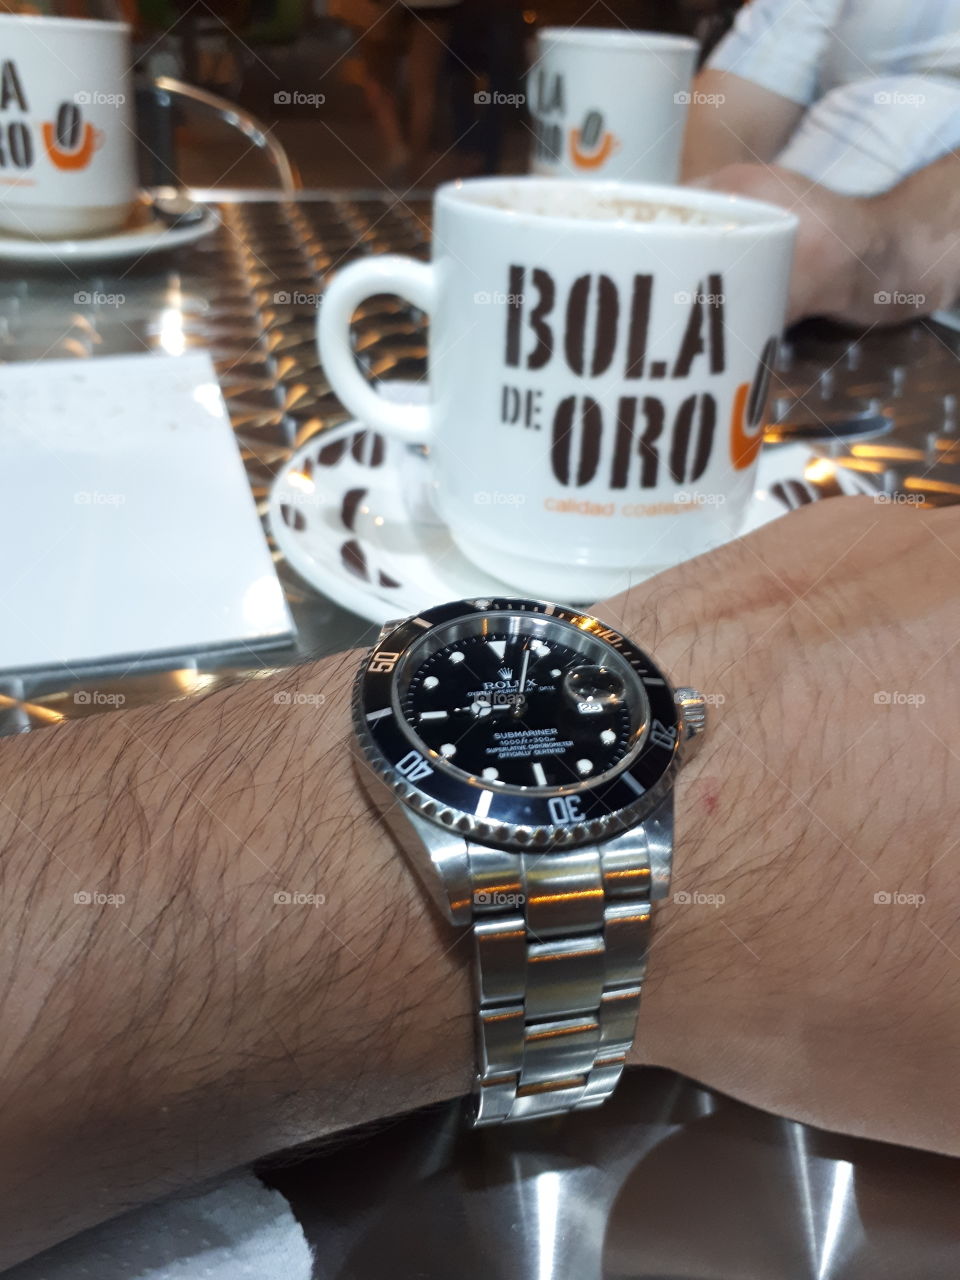 Rolex and coffee